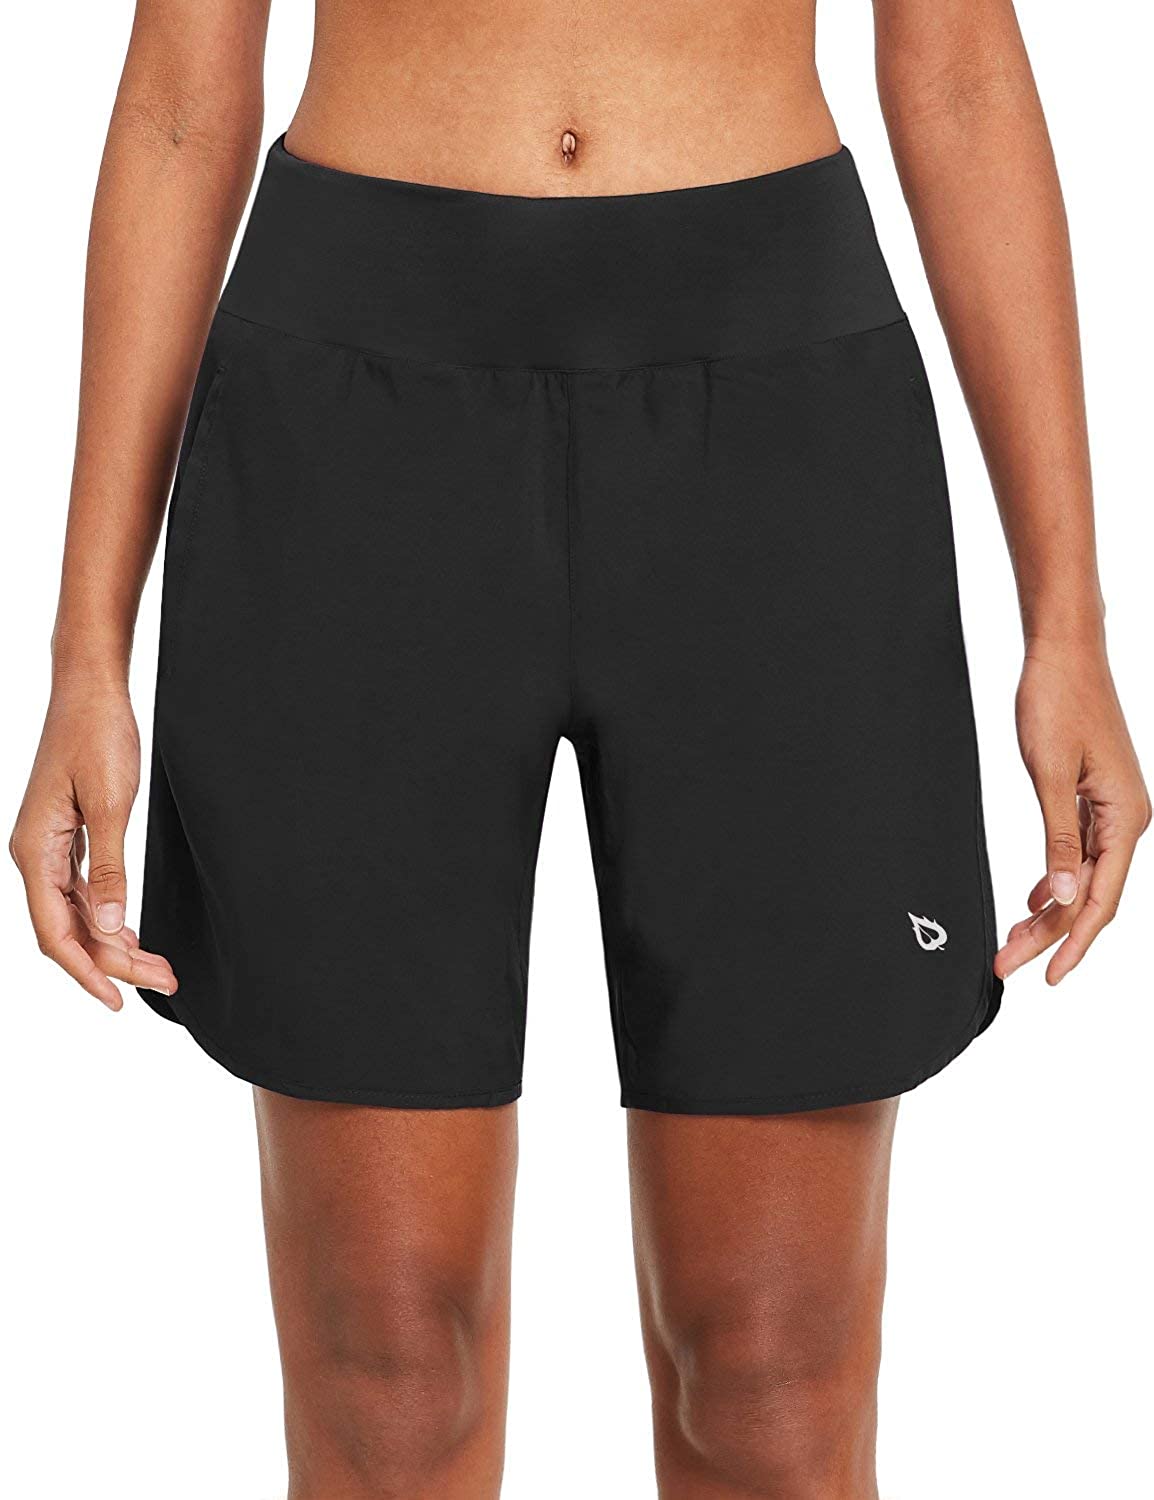 BALEAF Women's 7 Inches Long Running Shorts with Liner Lounge Sport Gym  Shorts B